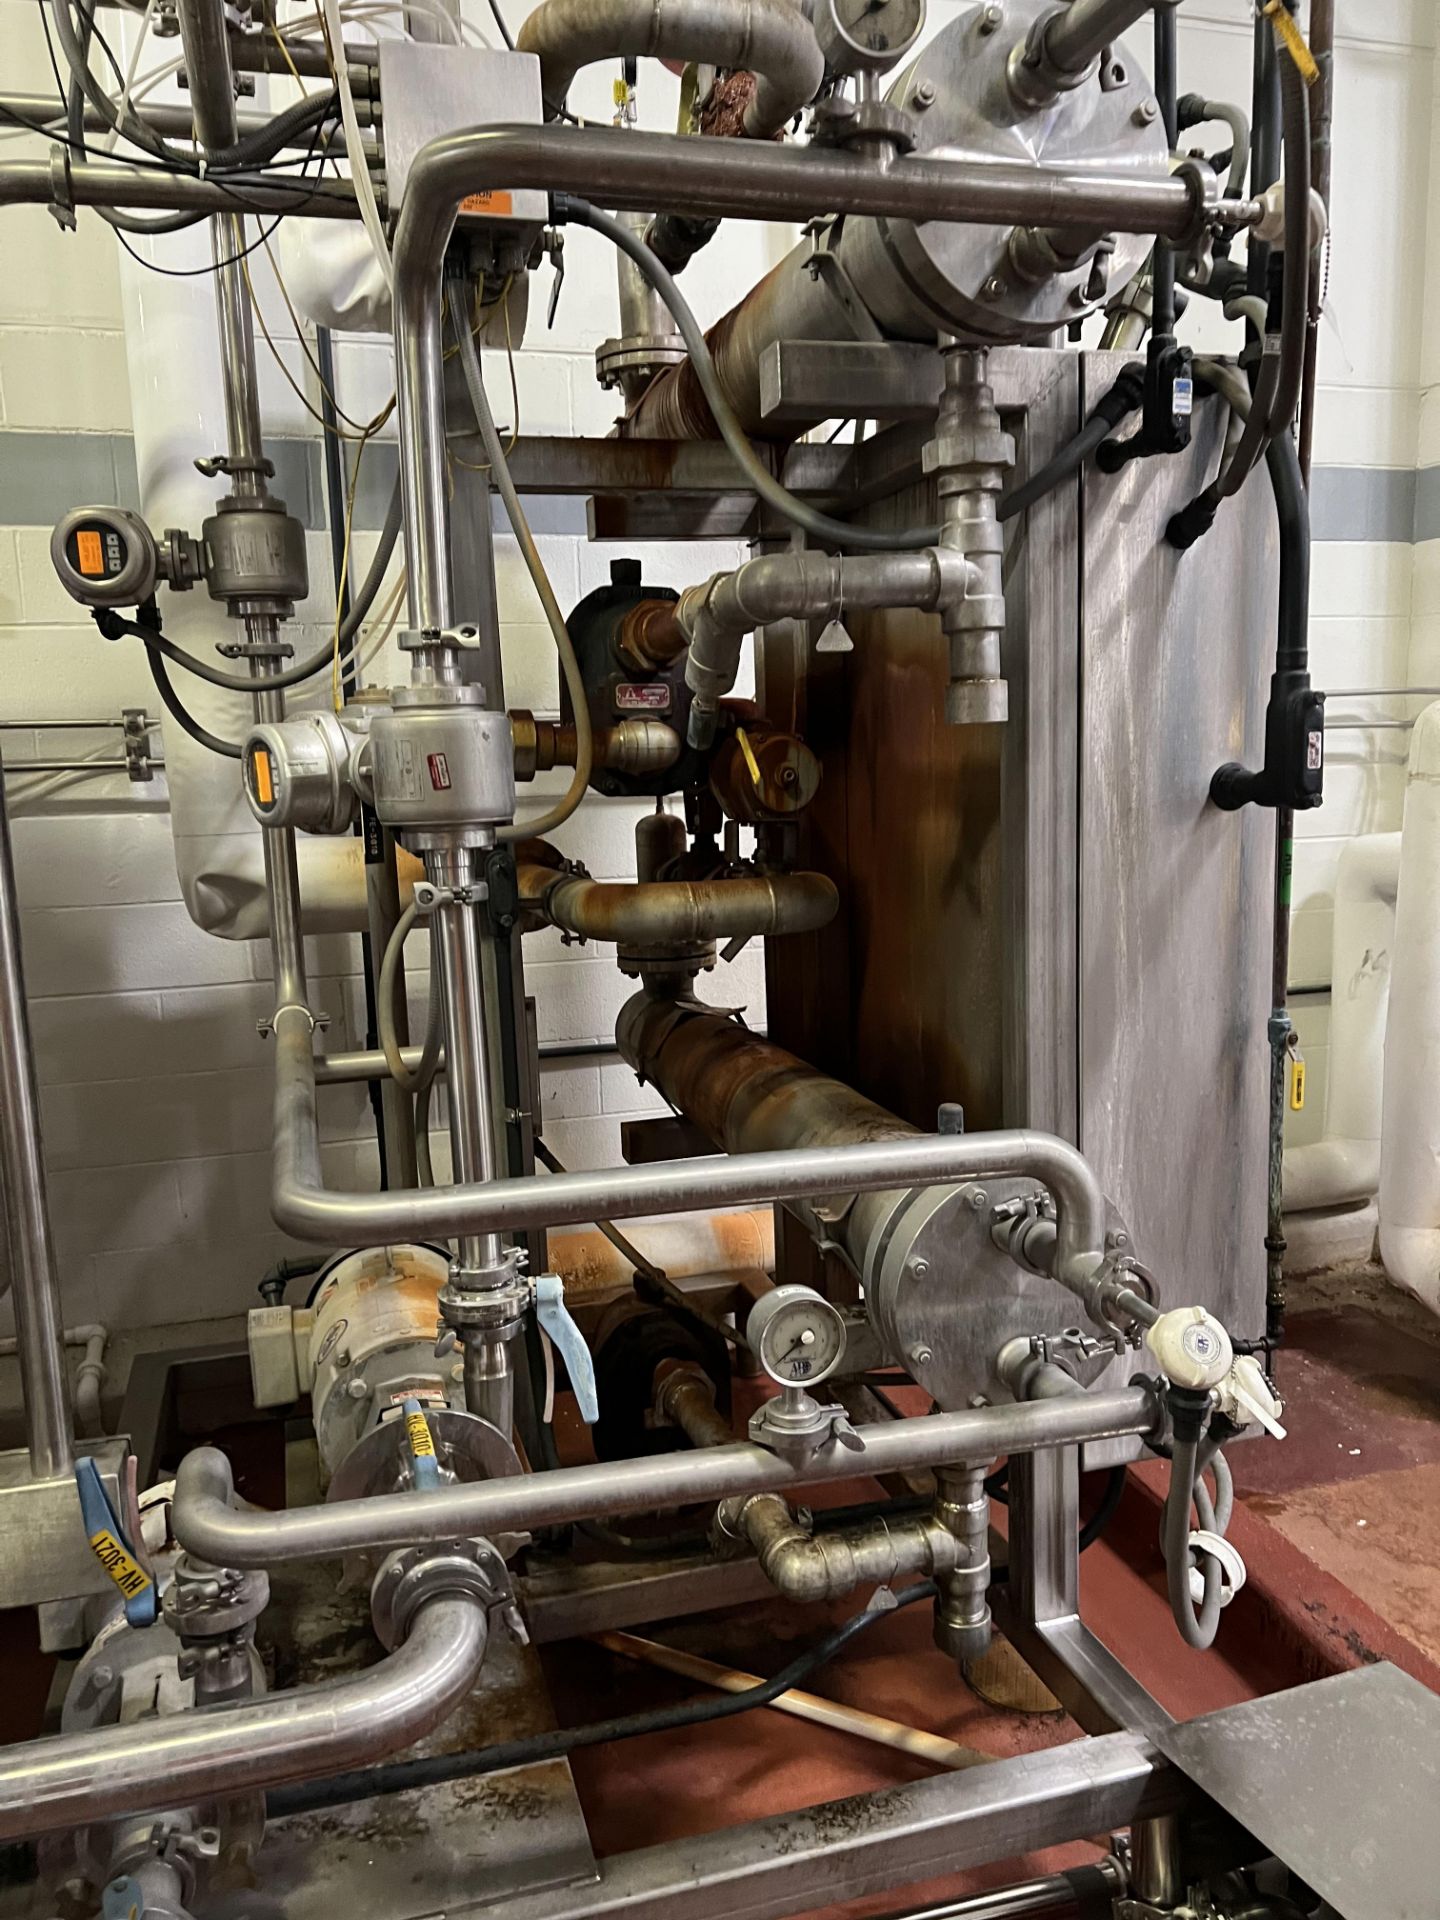 A&B Process Systems 4- 600 Gallon Tank CIP System with Pumps, Platform, Rigging/Loading Fee: $3800 - Image 8 of 11